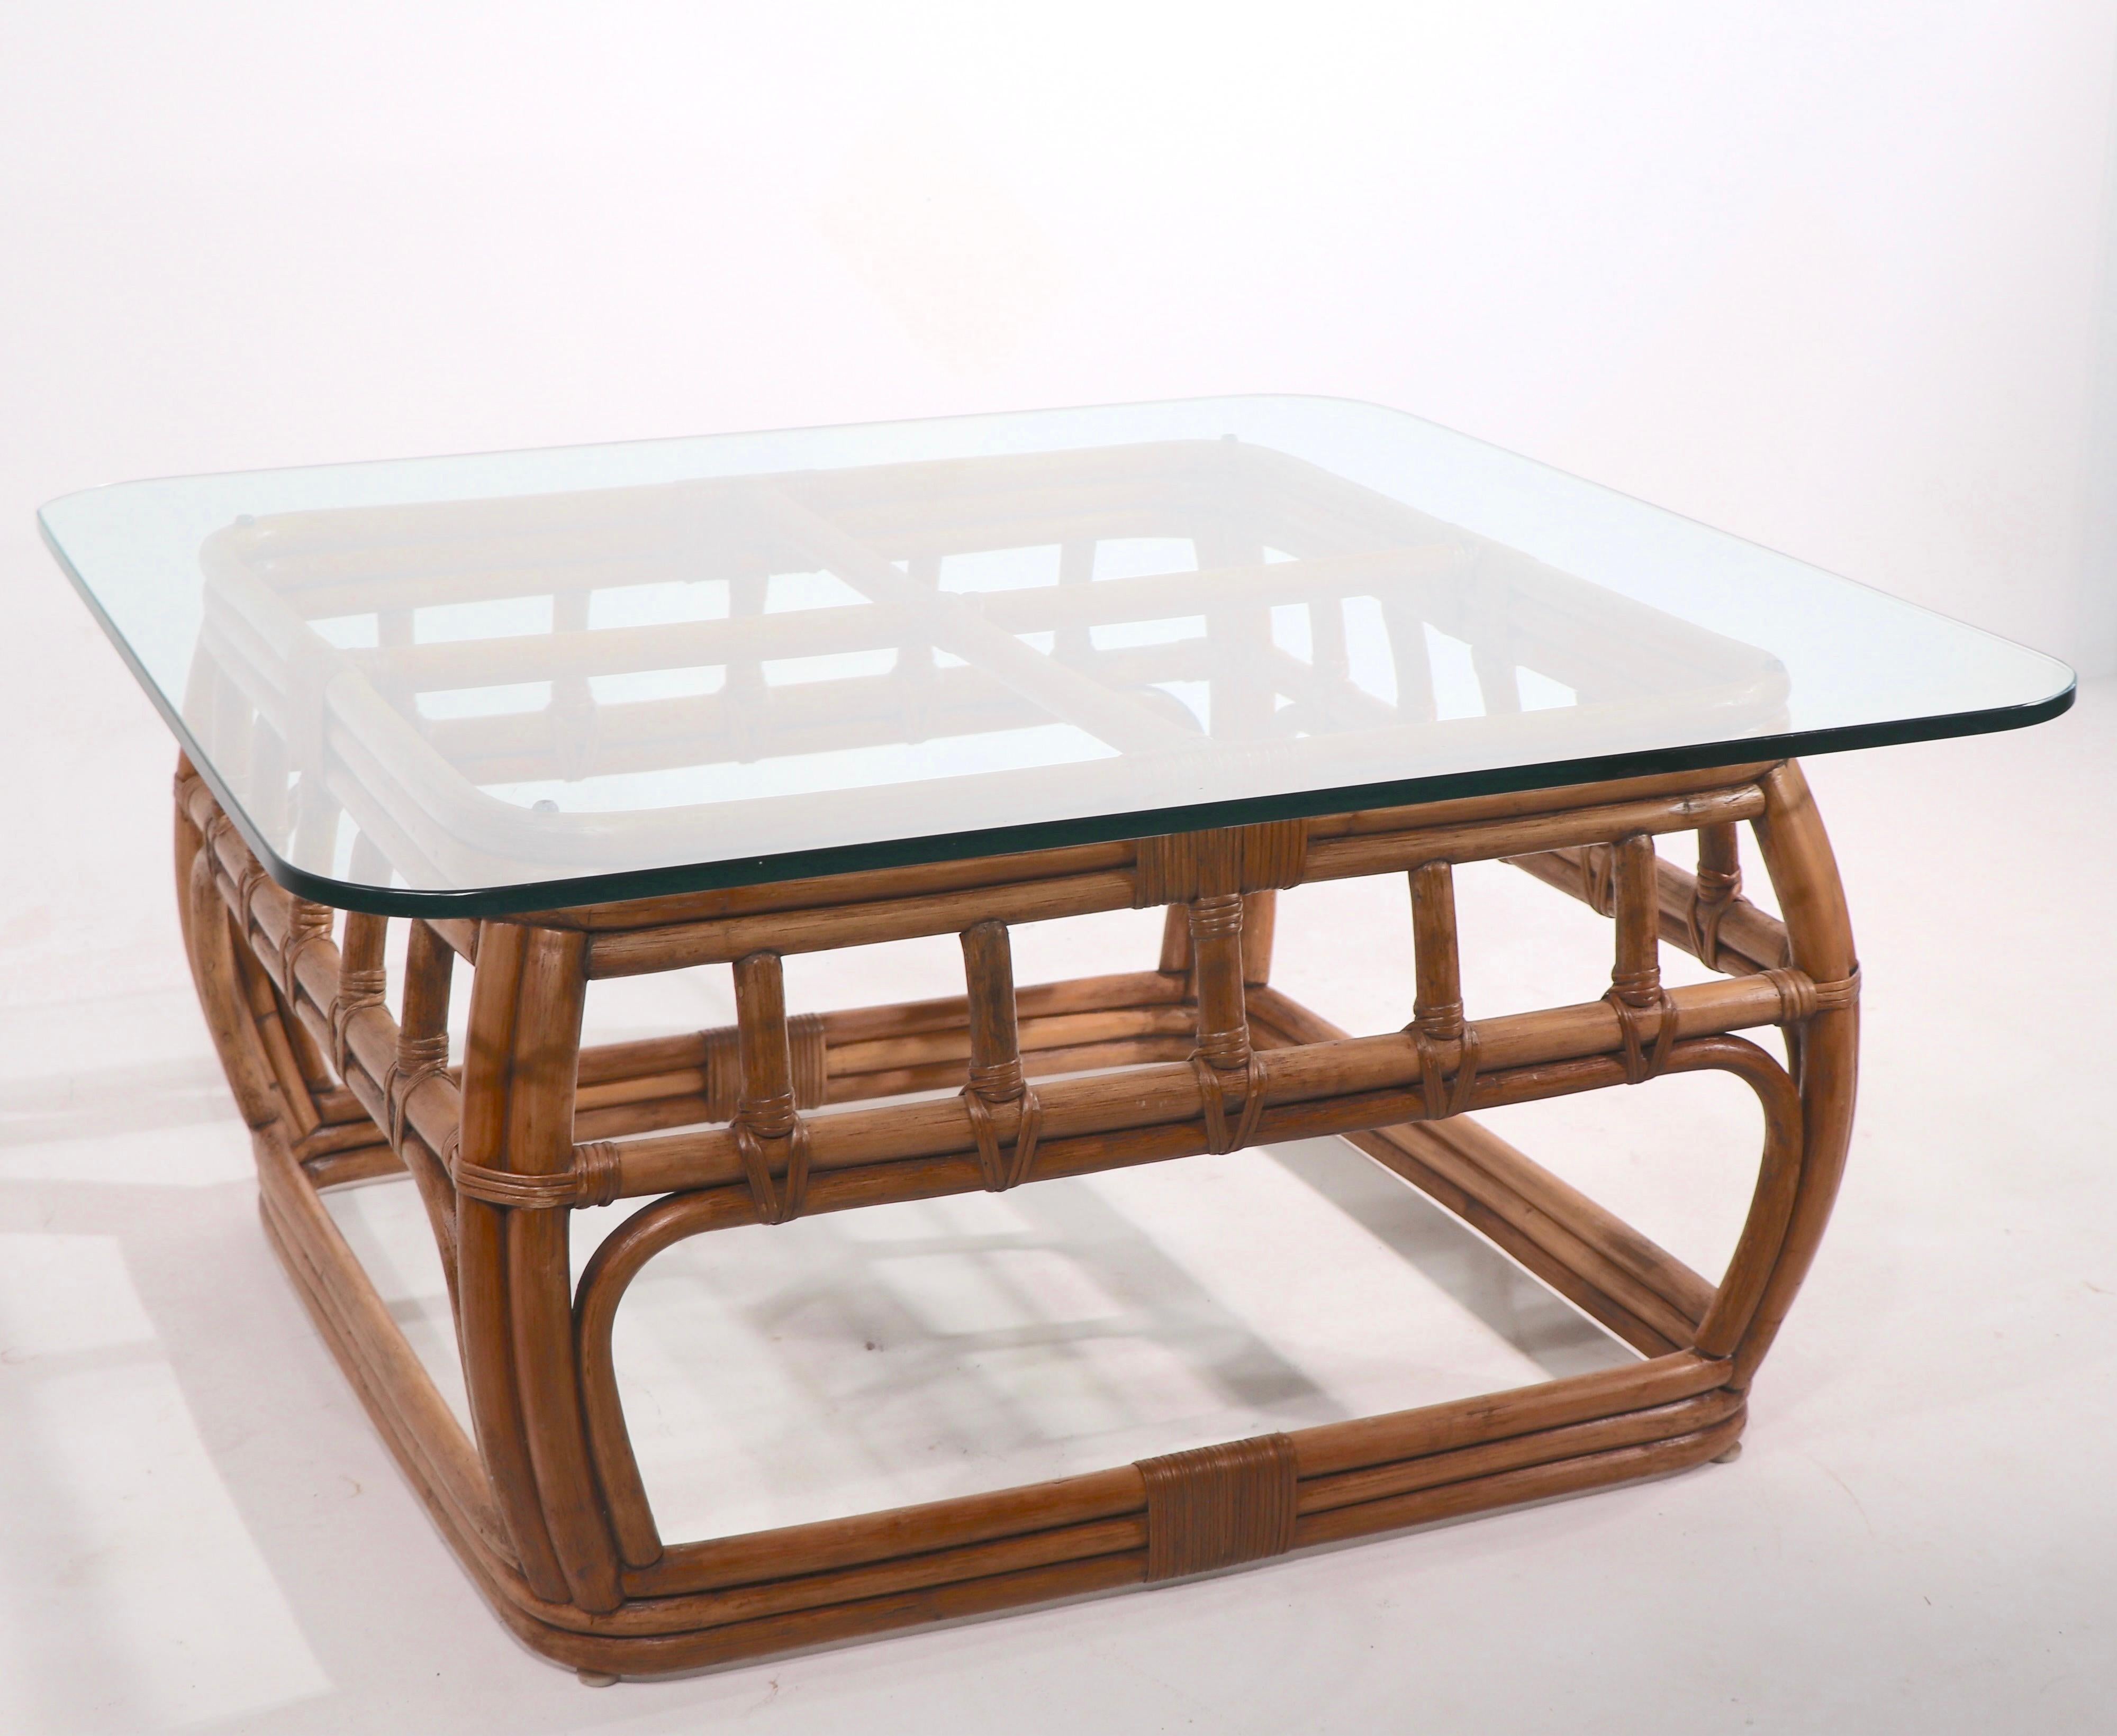 Chic and stylish bamboo coffee table with plate glass top. Reminiscent of McGuire, Henry Olko, Henry Link etc, unsigned. Original, clean, ready to use condition. Please view the companion pieces, sofa, lounge chair and tables we have listed